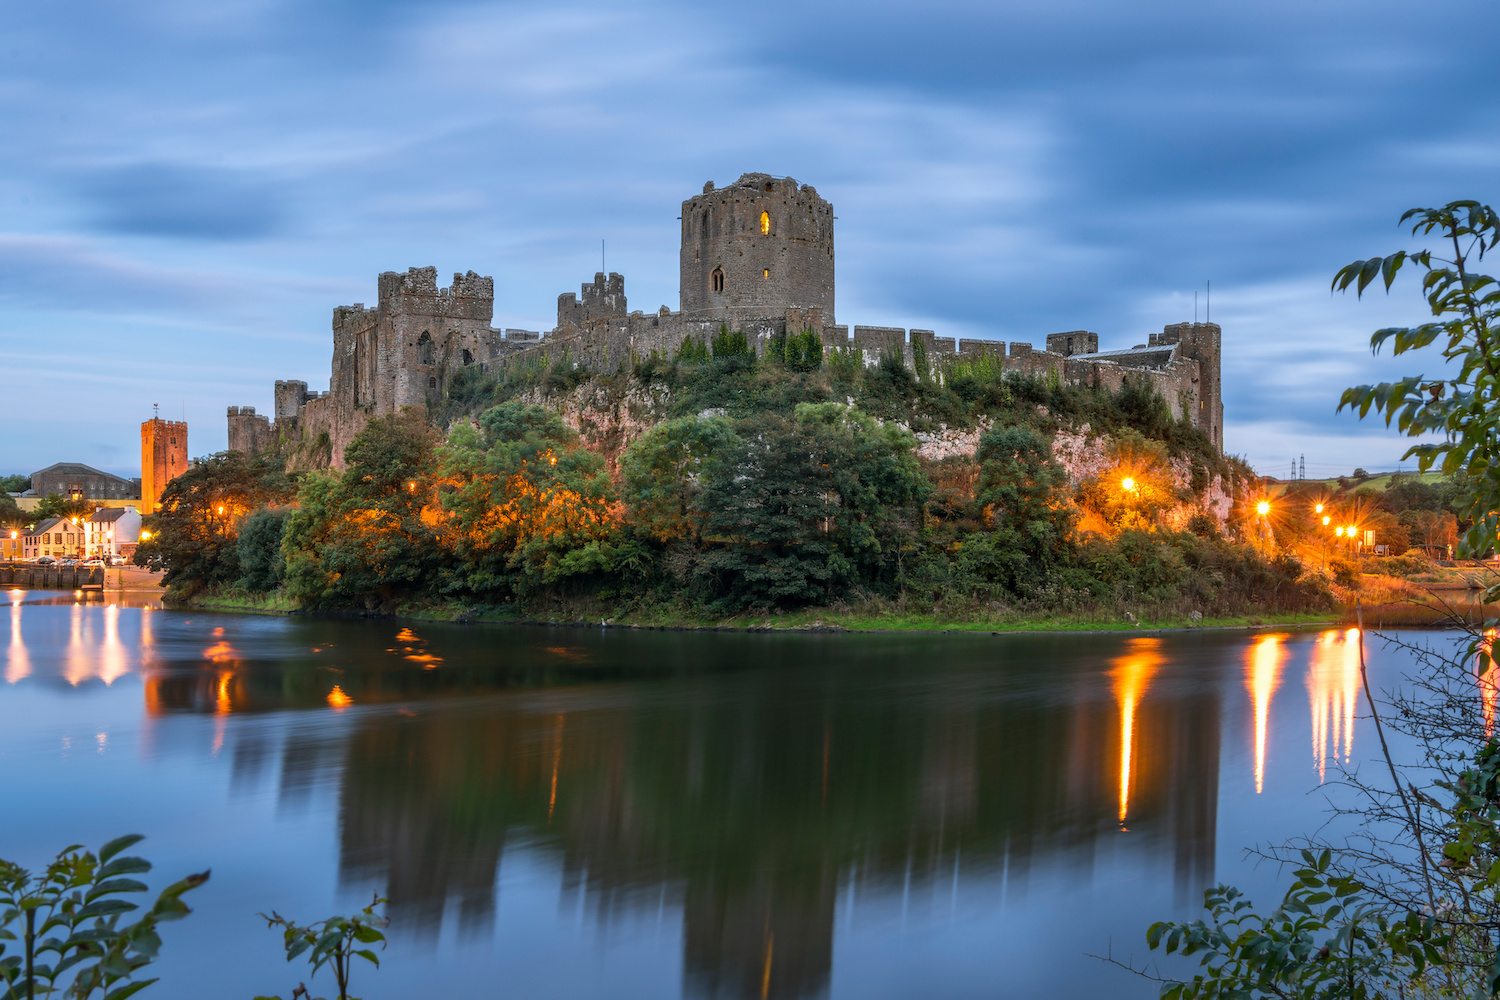 Pembroke, Wales, United Kingdom - September 22, 2016: Panoramic view of Pembroke Castle in South Wales at night